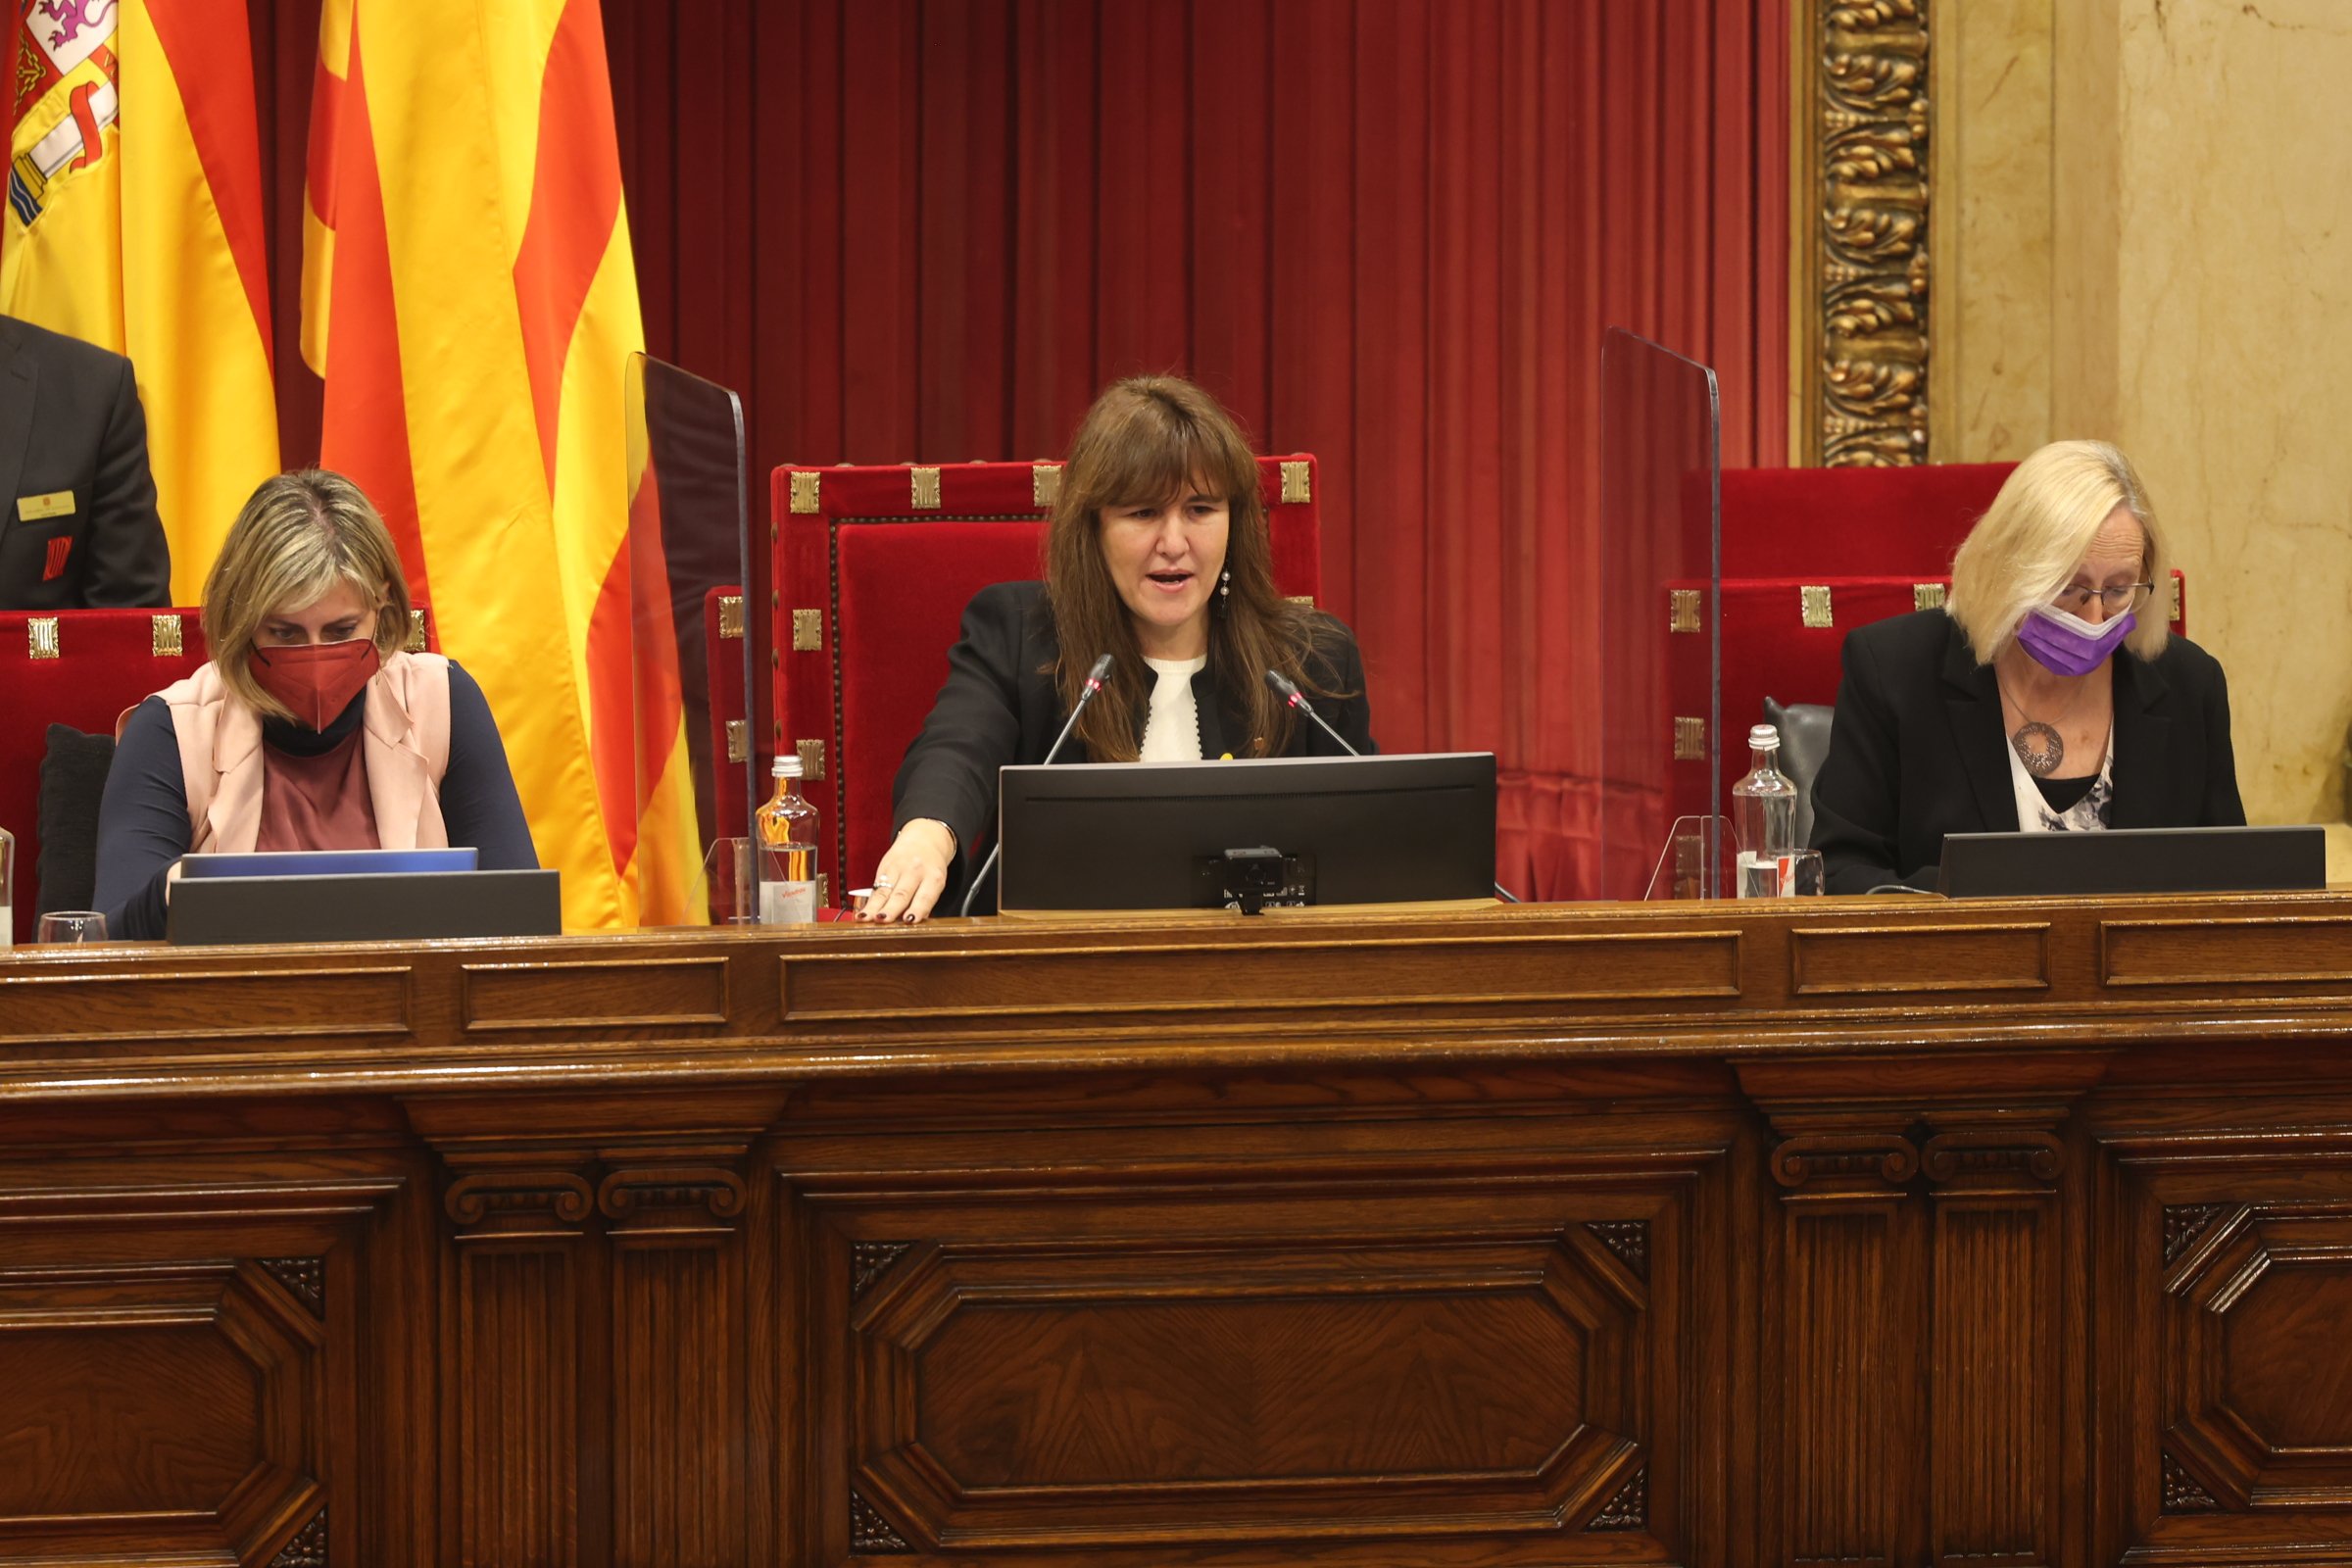 Court partially admits demands by Catalan speaker Borràs and process is delayed